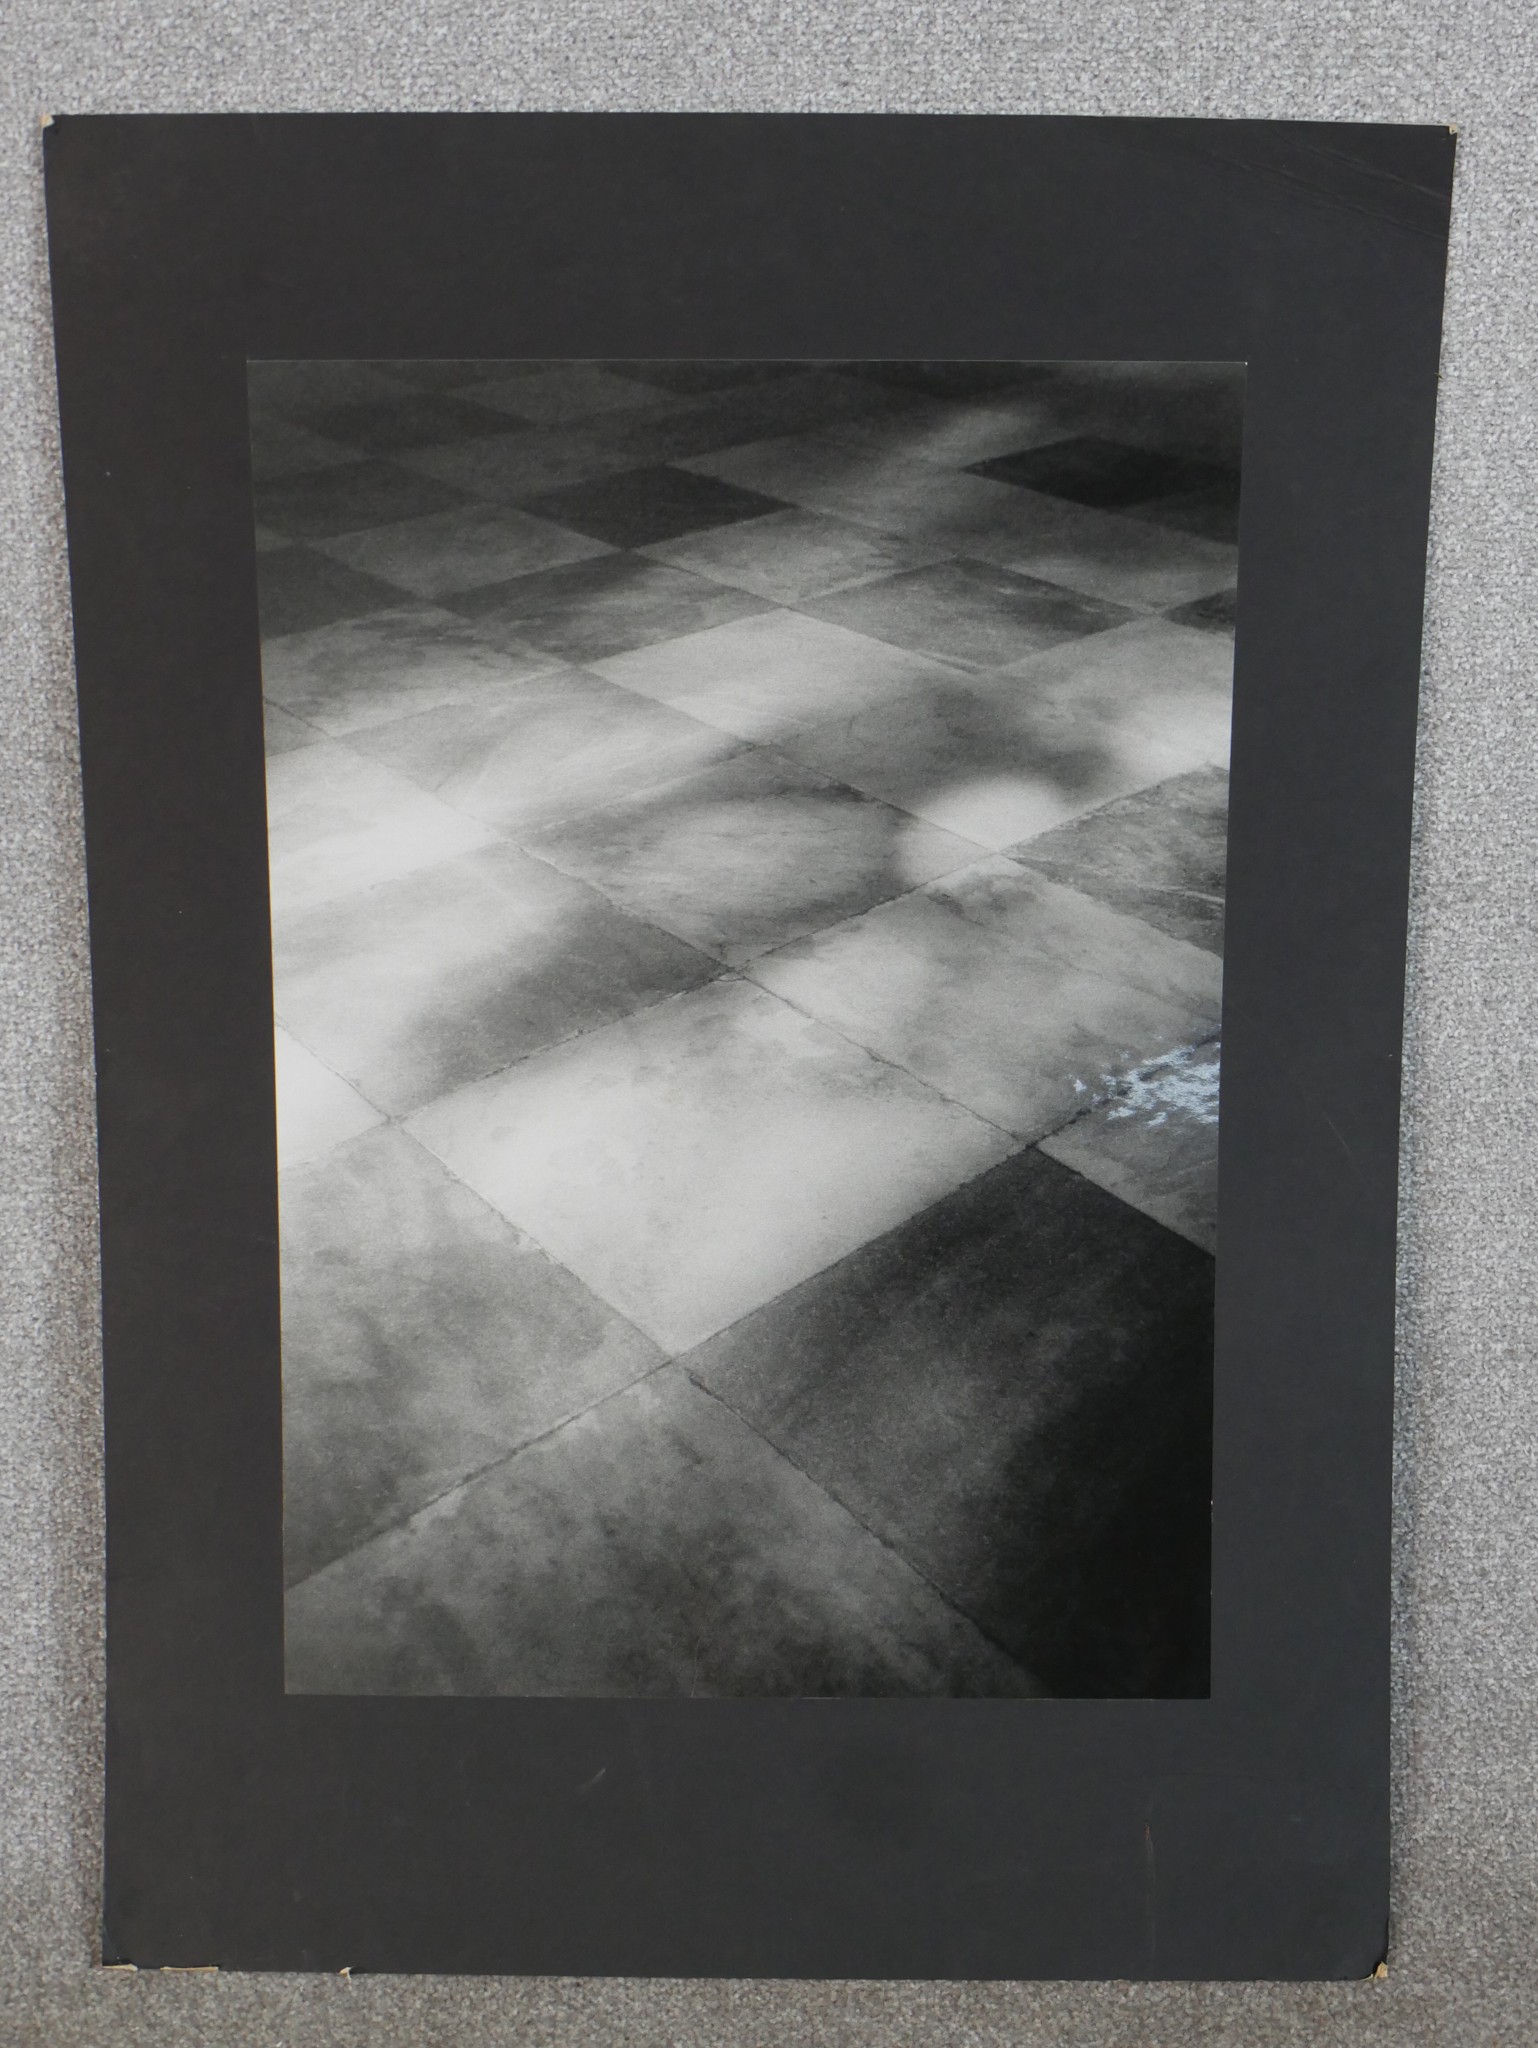 C. D. Mallon (20th century) Tiled Floor, black and white photograph, unframed, mounted, label verso. - Image 2 of 4